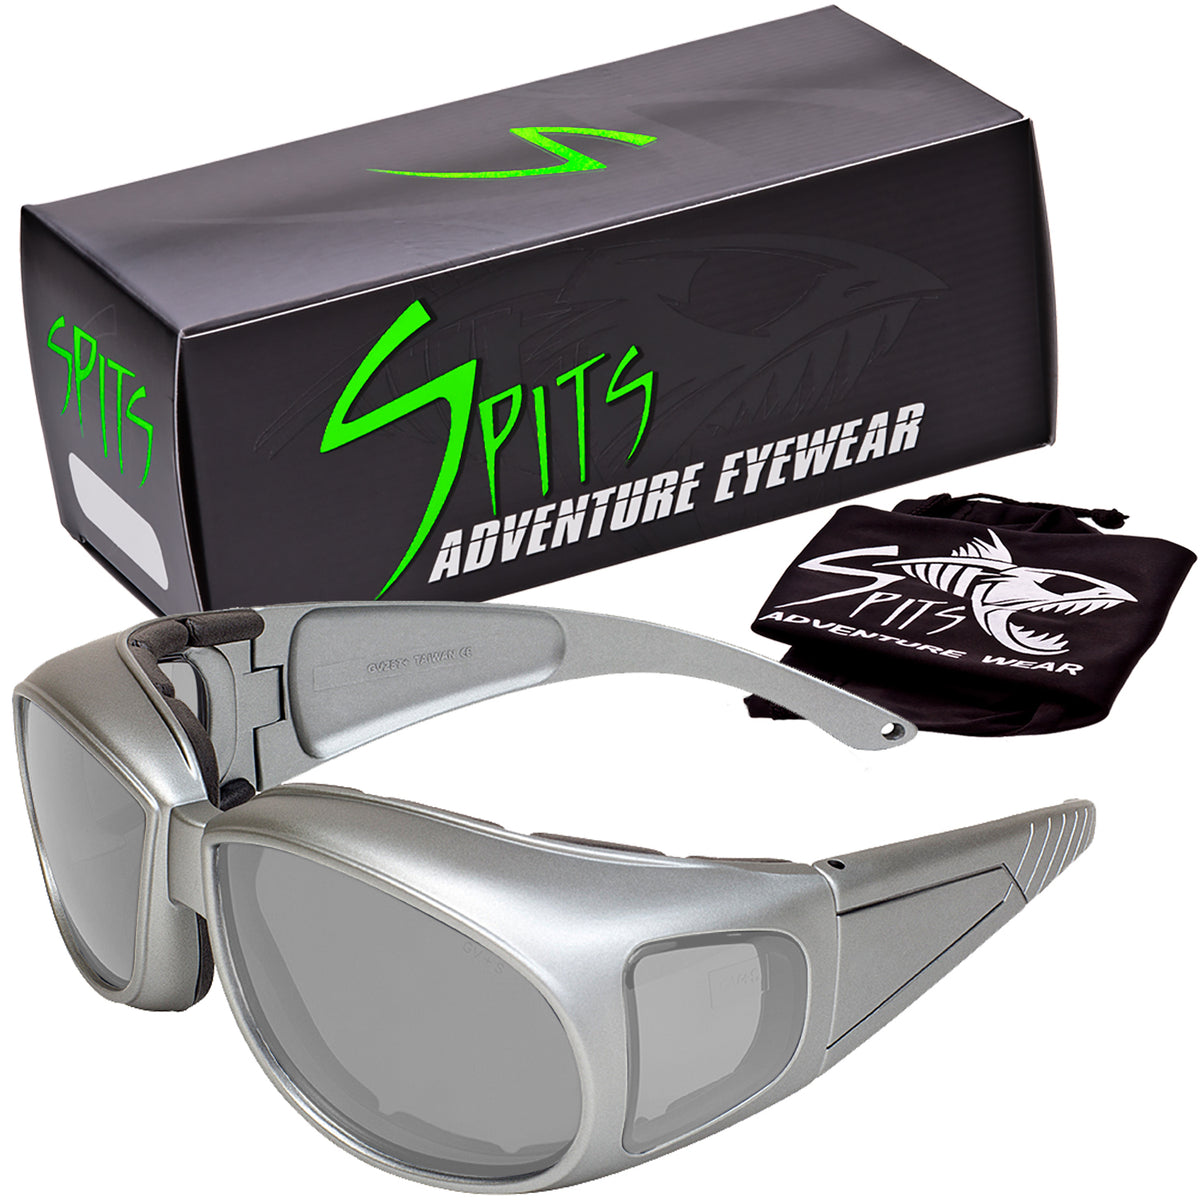 Spits Eyewear Outrigger Over Glasses Safety Glasses Foam Padded Sunglasses with Metallic Gray Frame and Various Lens Color Options